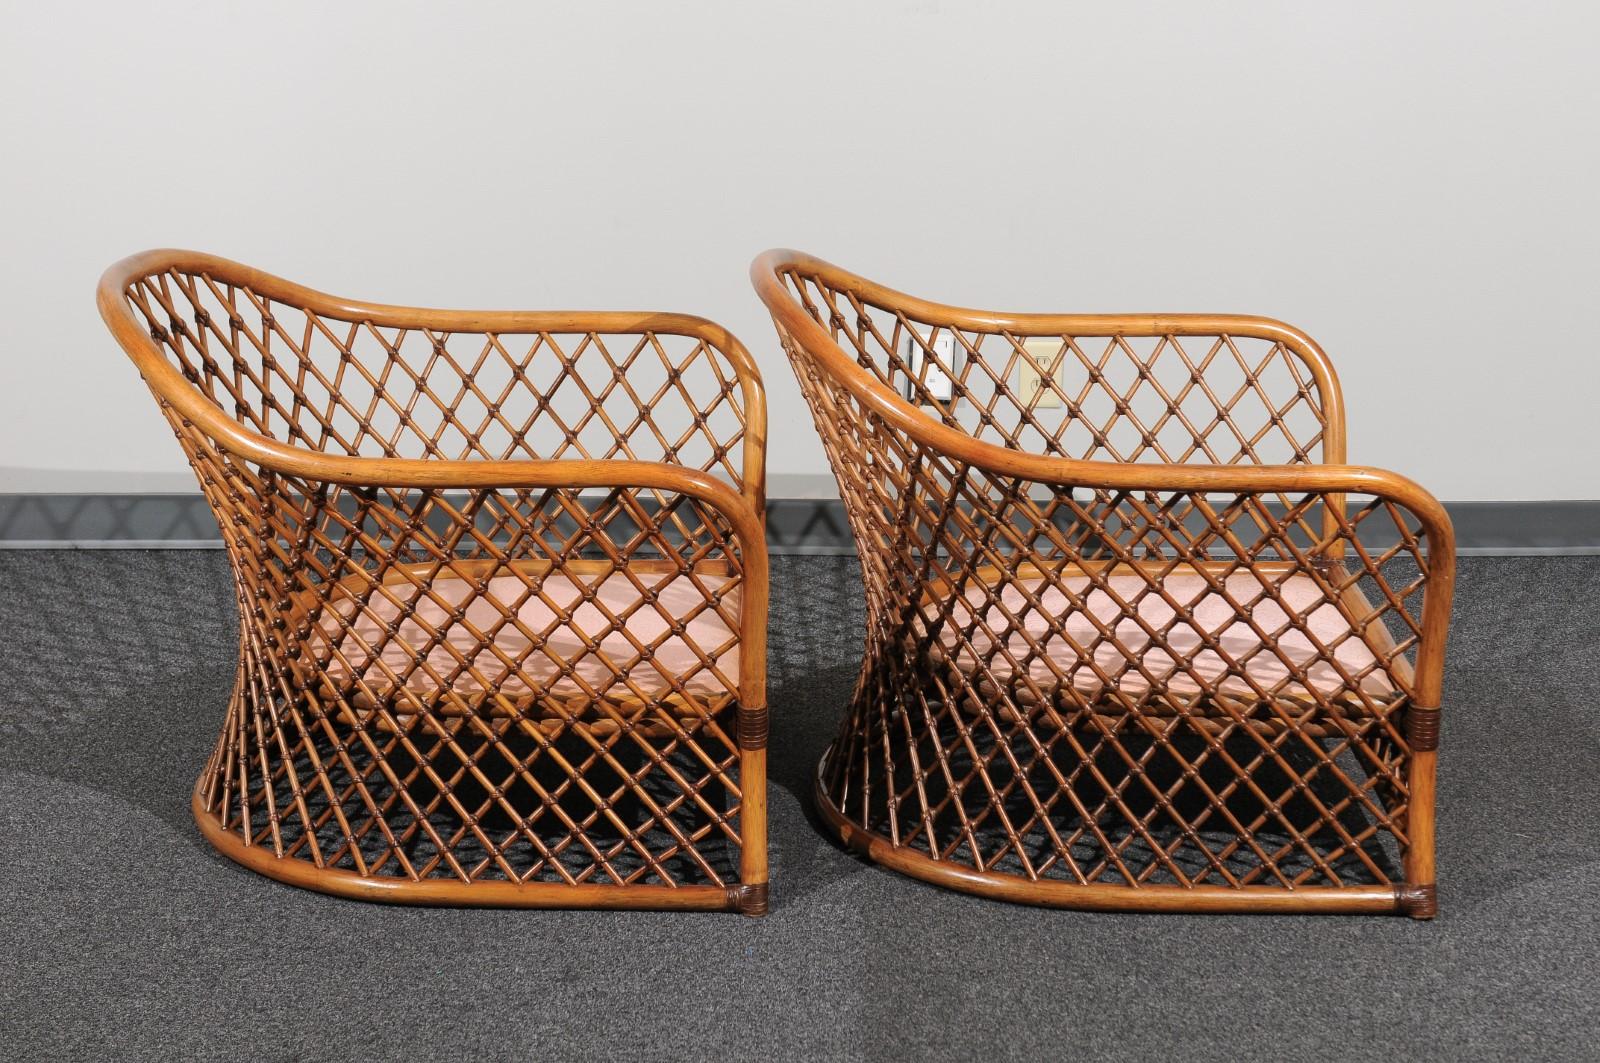 Late 20th Century Sculptural Restored Pair of Large-Scale Lattice Club Chairs, circa 1990